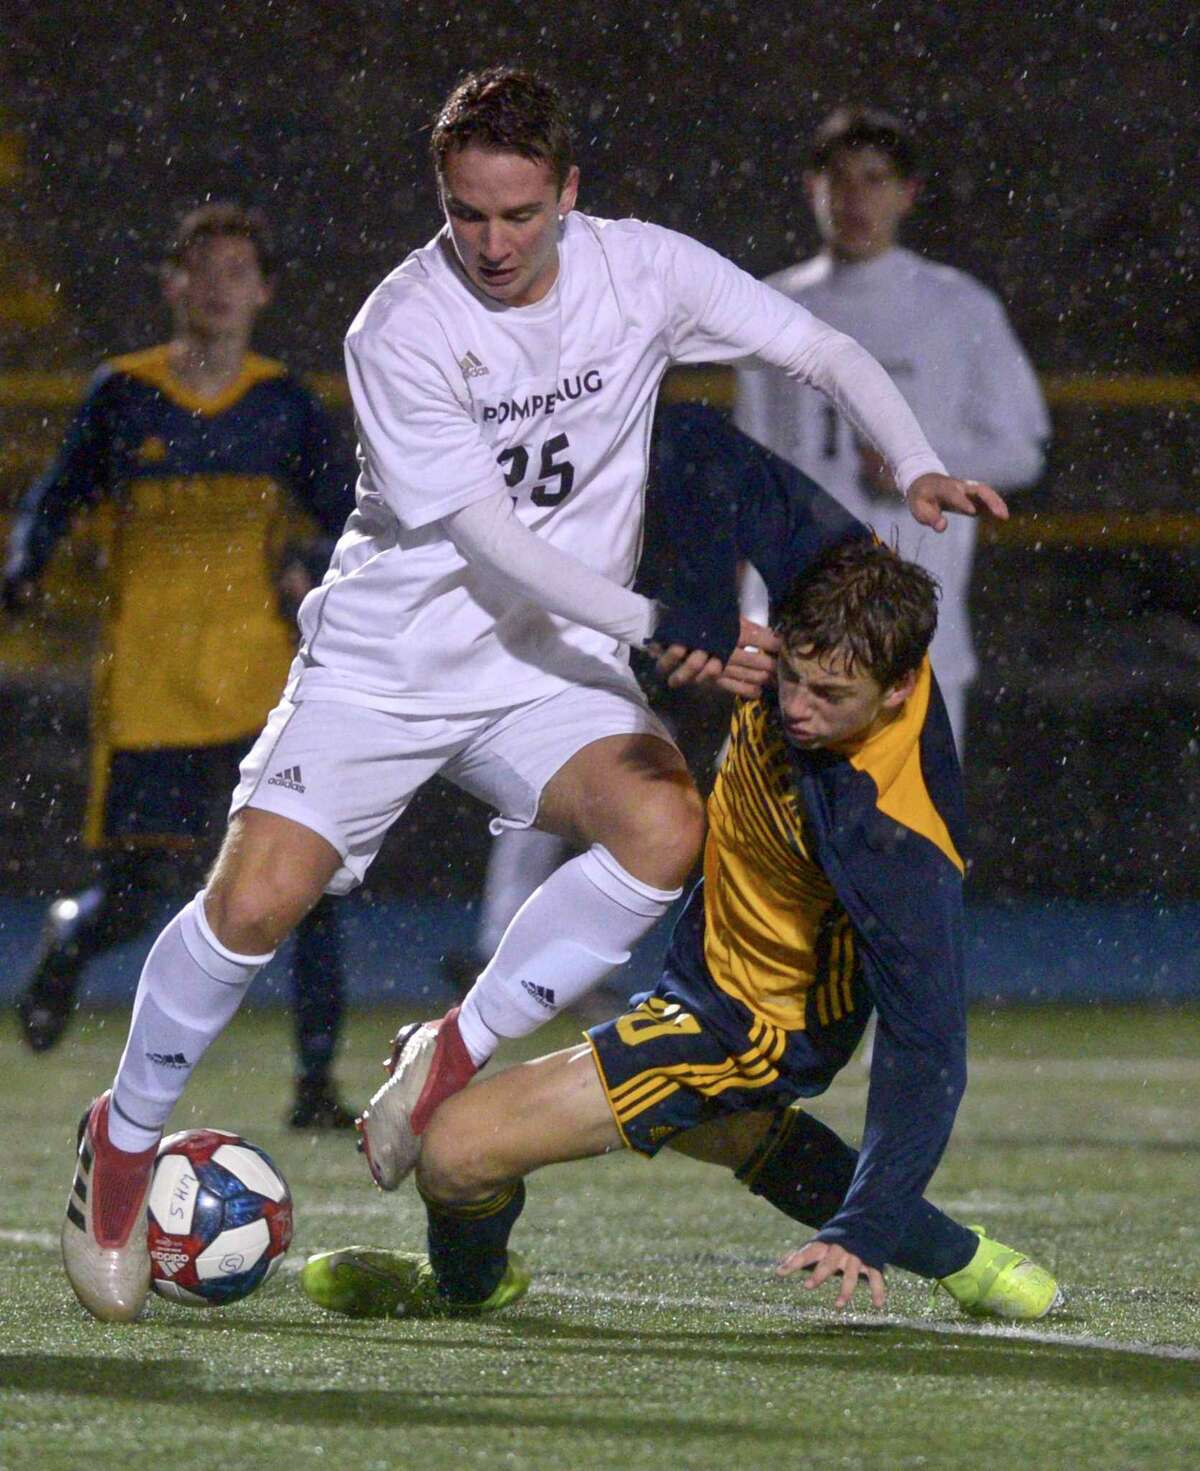 Weston's Max Weiss (20) goes down during a collision with Pomperaug's Eric Tolin (25) in the SWC boys soccer championship game between Pomperaug and Weston high schools. Thursday night, November 7, 2019, at Newtown High School, Newtown, Conn.